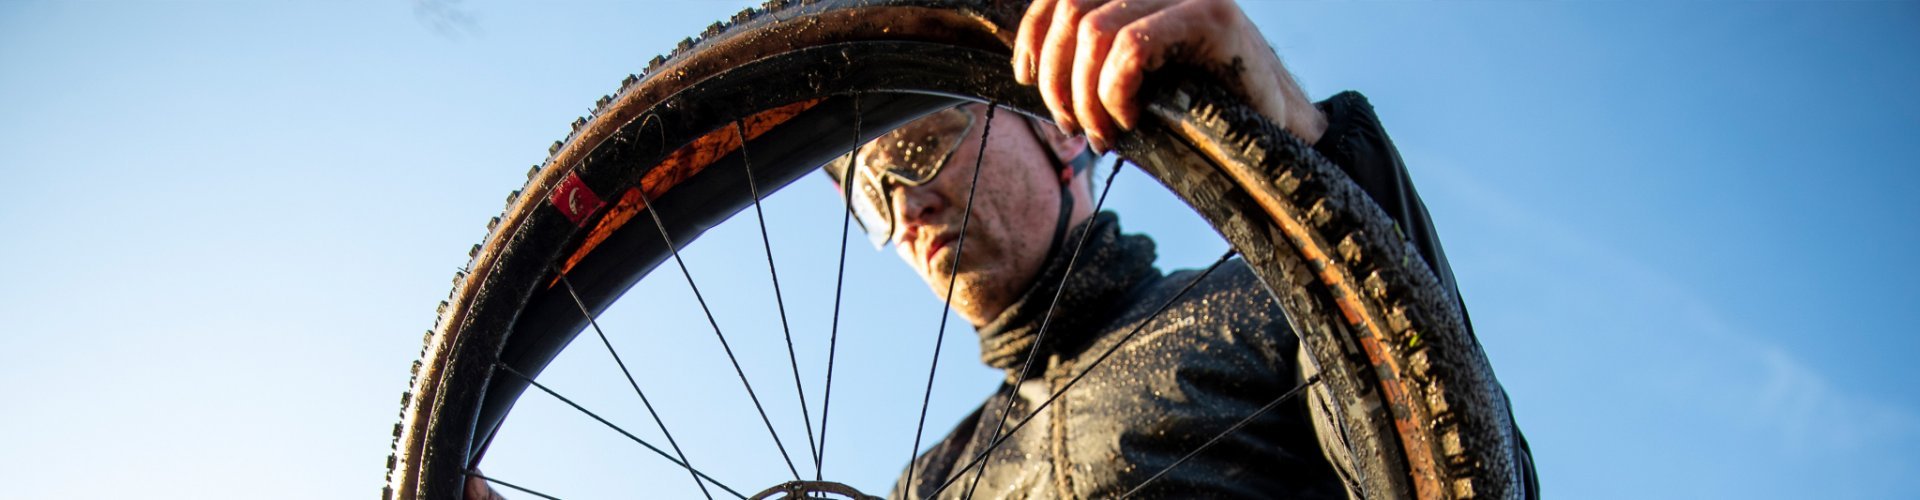 A biker installs a new tube between the rim and tyre of his gravel bike after a puncture.